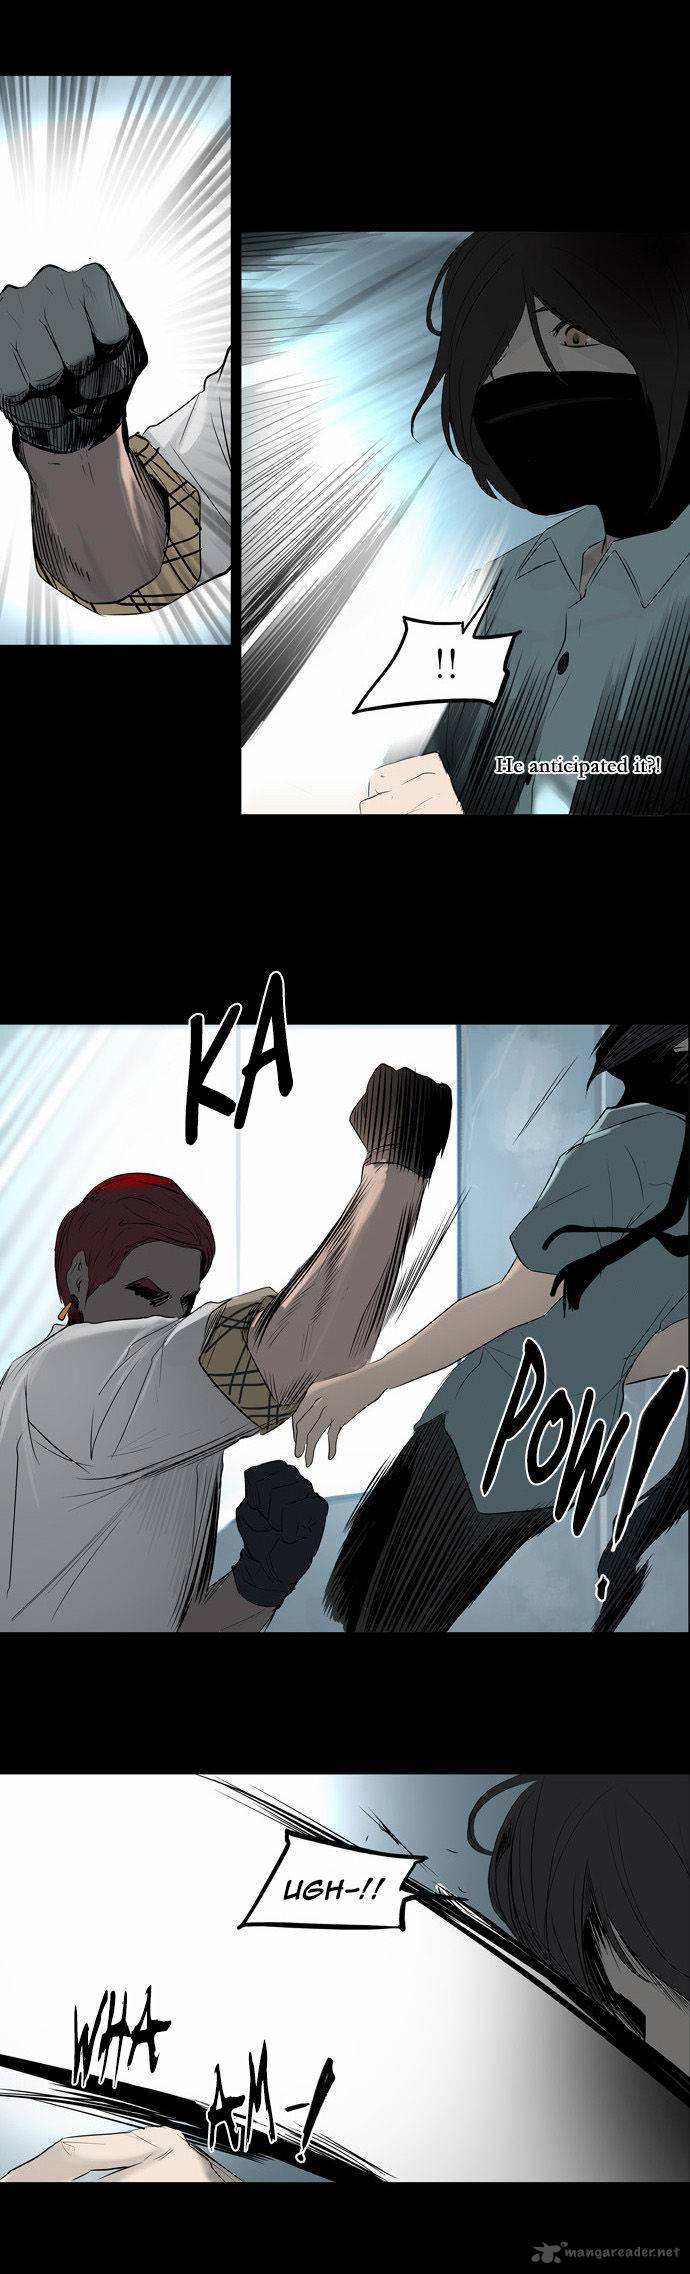 Tower Of God 144 18